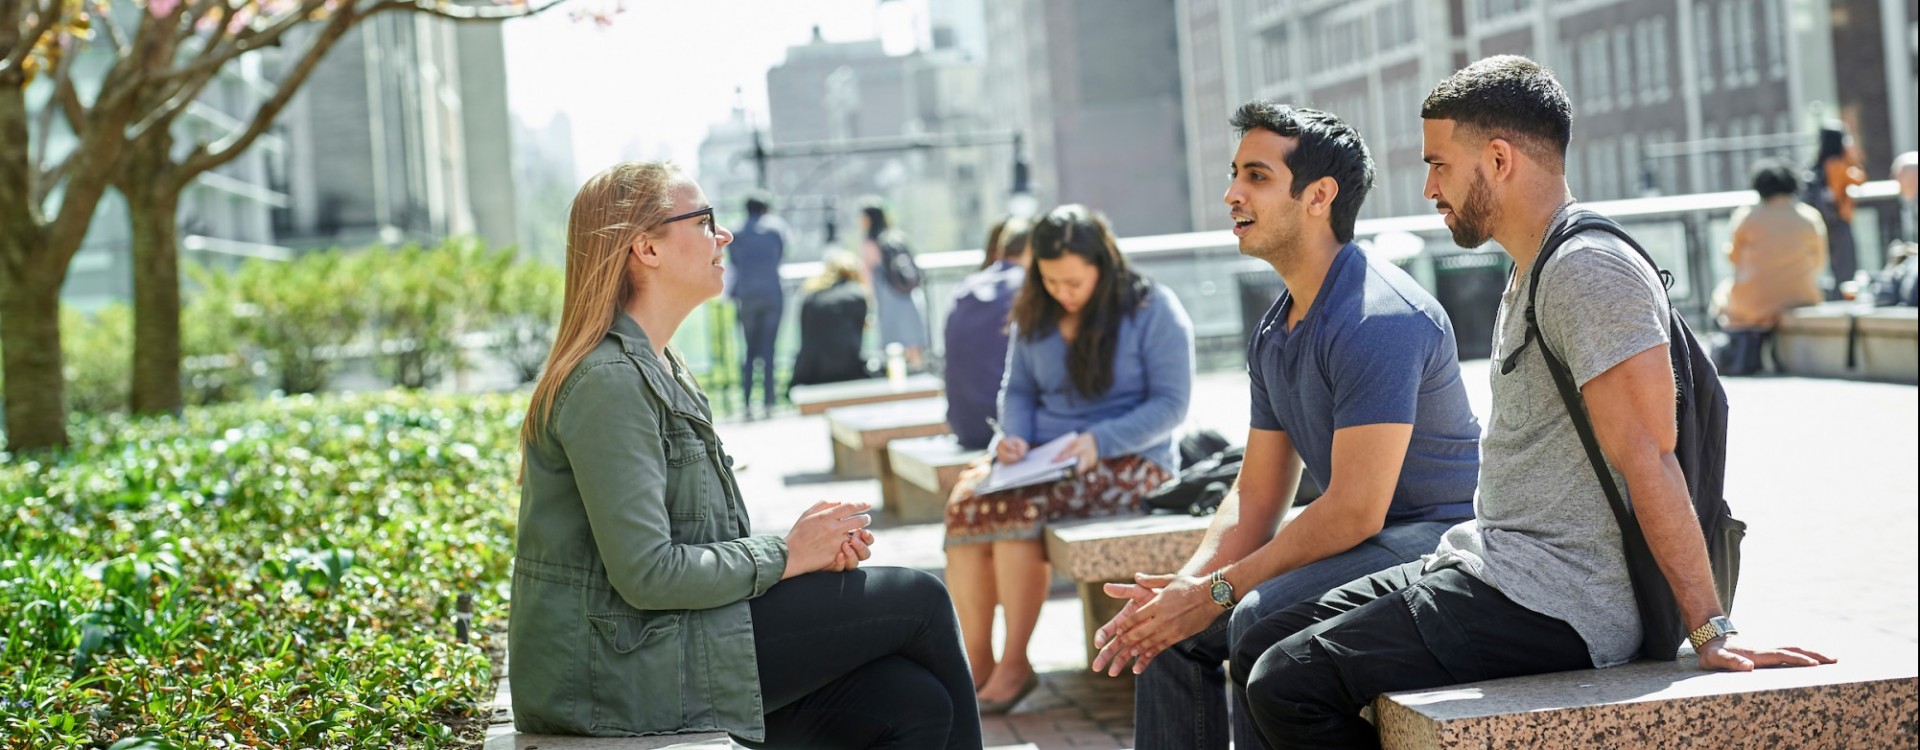 Three seated people engaging in lively conversation under a blooming cherry blossom tree. On the left, a woman with shoulder-length blonde hair wears glasses, a green jacket, and black pants. Her hands are clasped in her lap. In the middle, a man with short black hair wears a blue collared shirt and blue jeans. His widespread hands gesture downward. On the right, a man with cropped black hair and a beard wears a gray t-shirt, a black backpack, and black pants. He leans back on his hands.